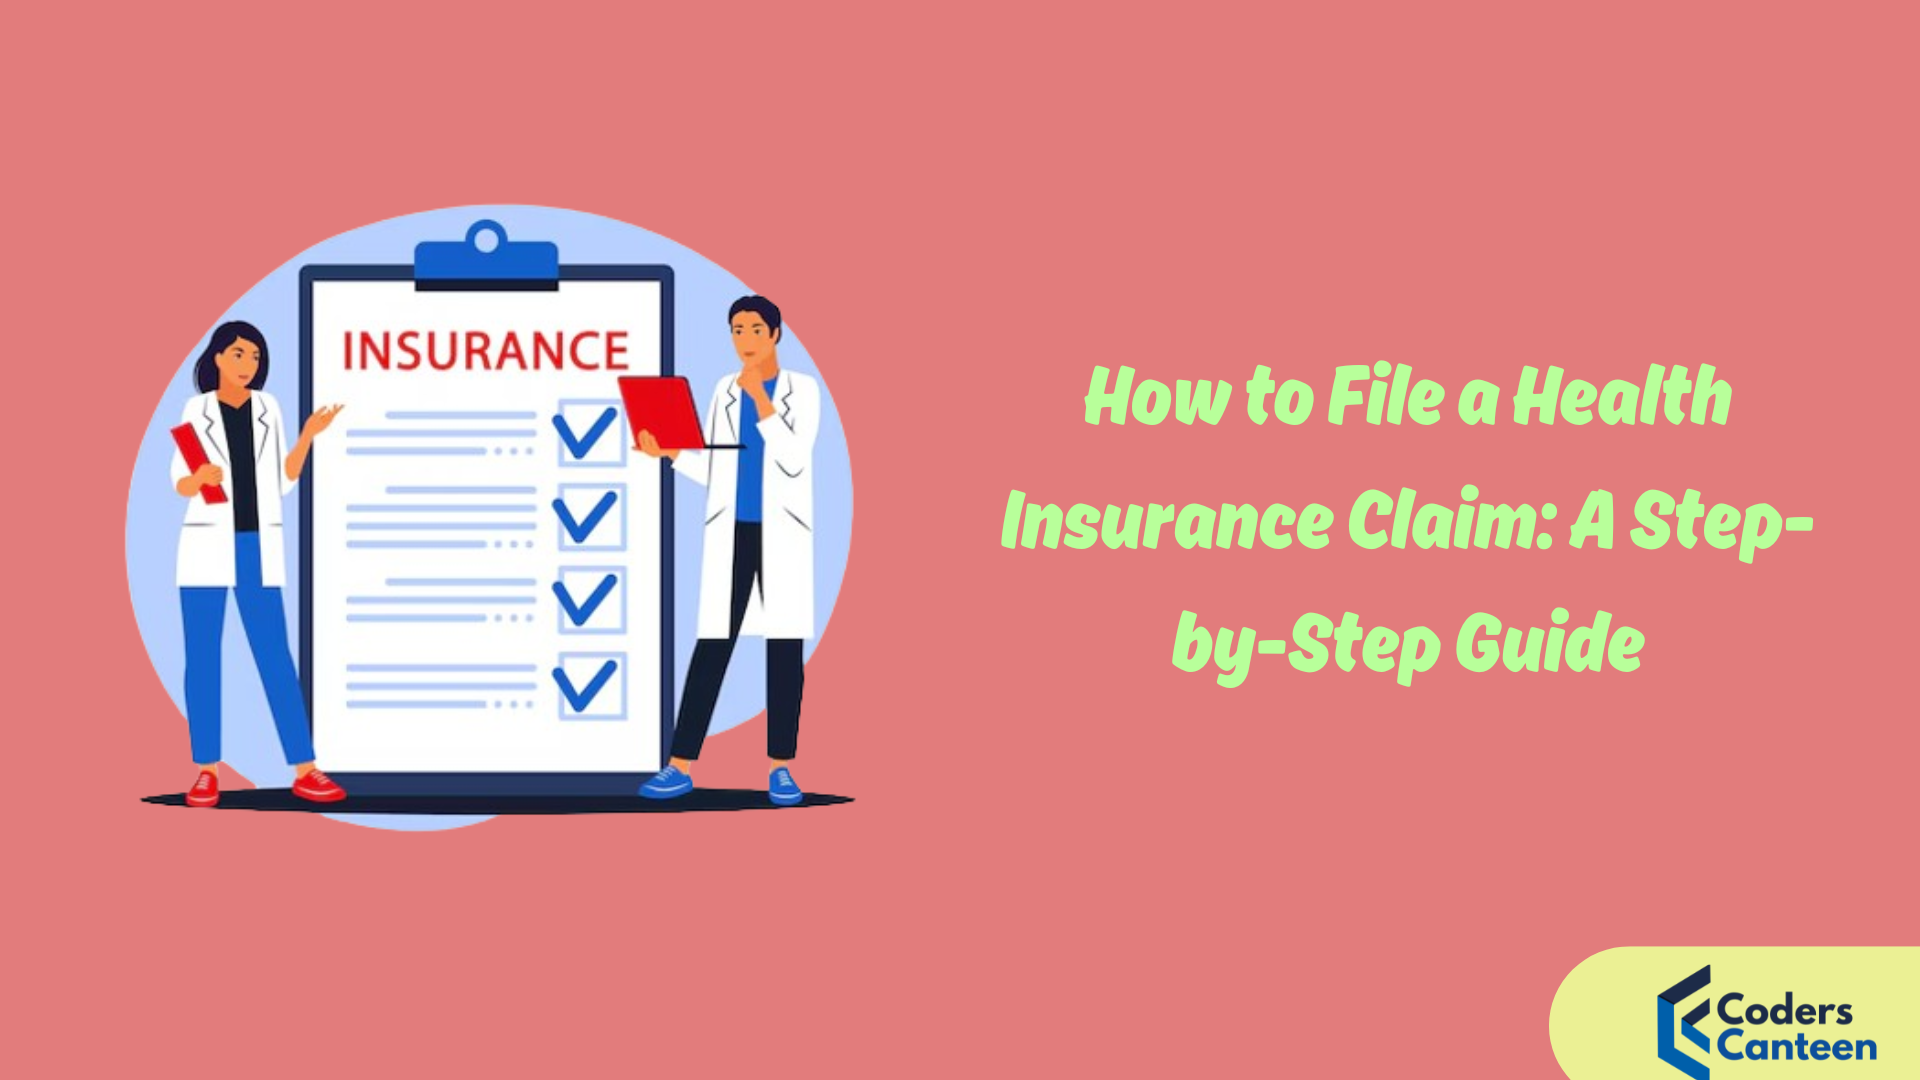 How to File a Health Insurance Claim: A Step-by-Step Guide